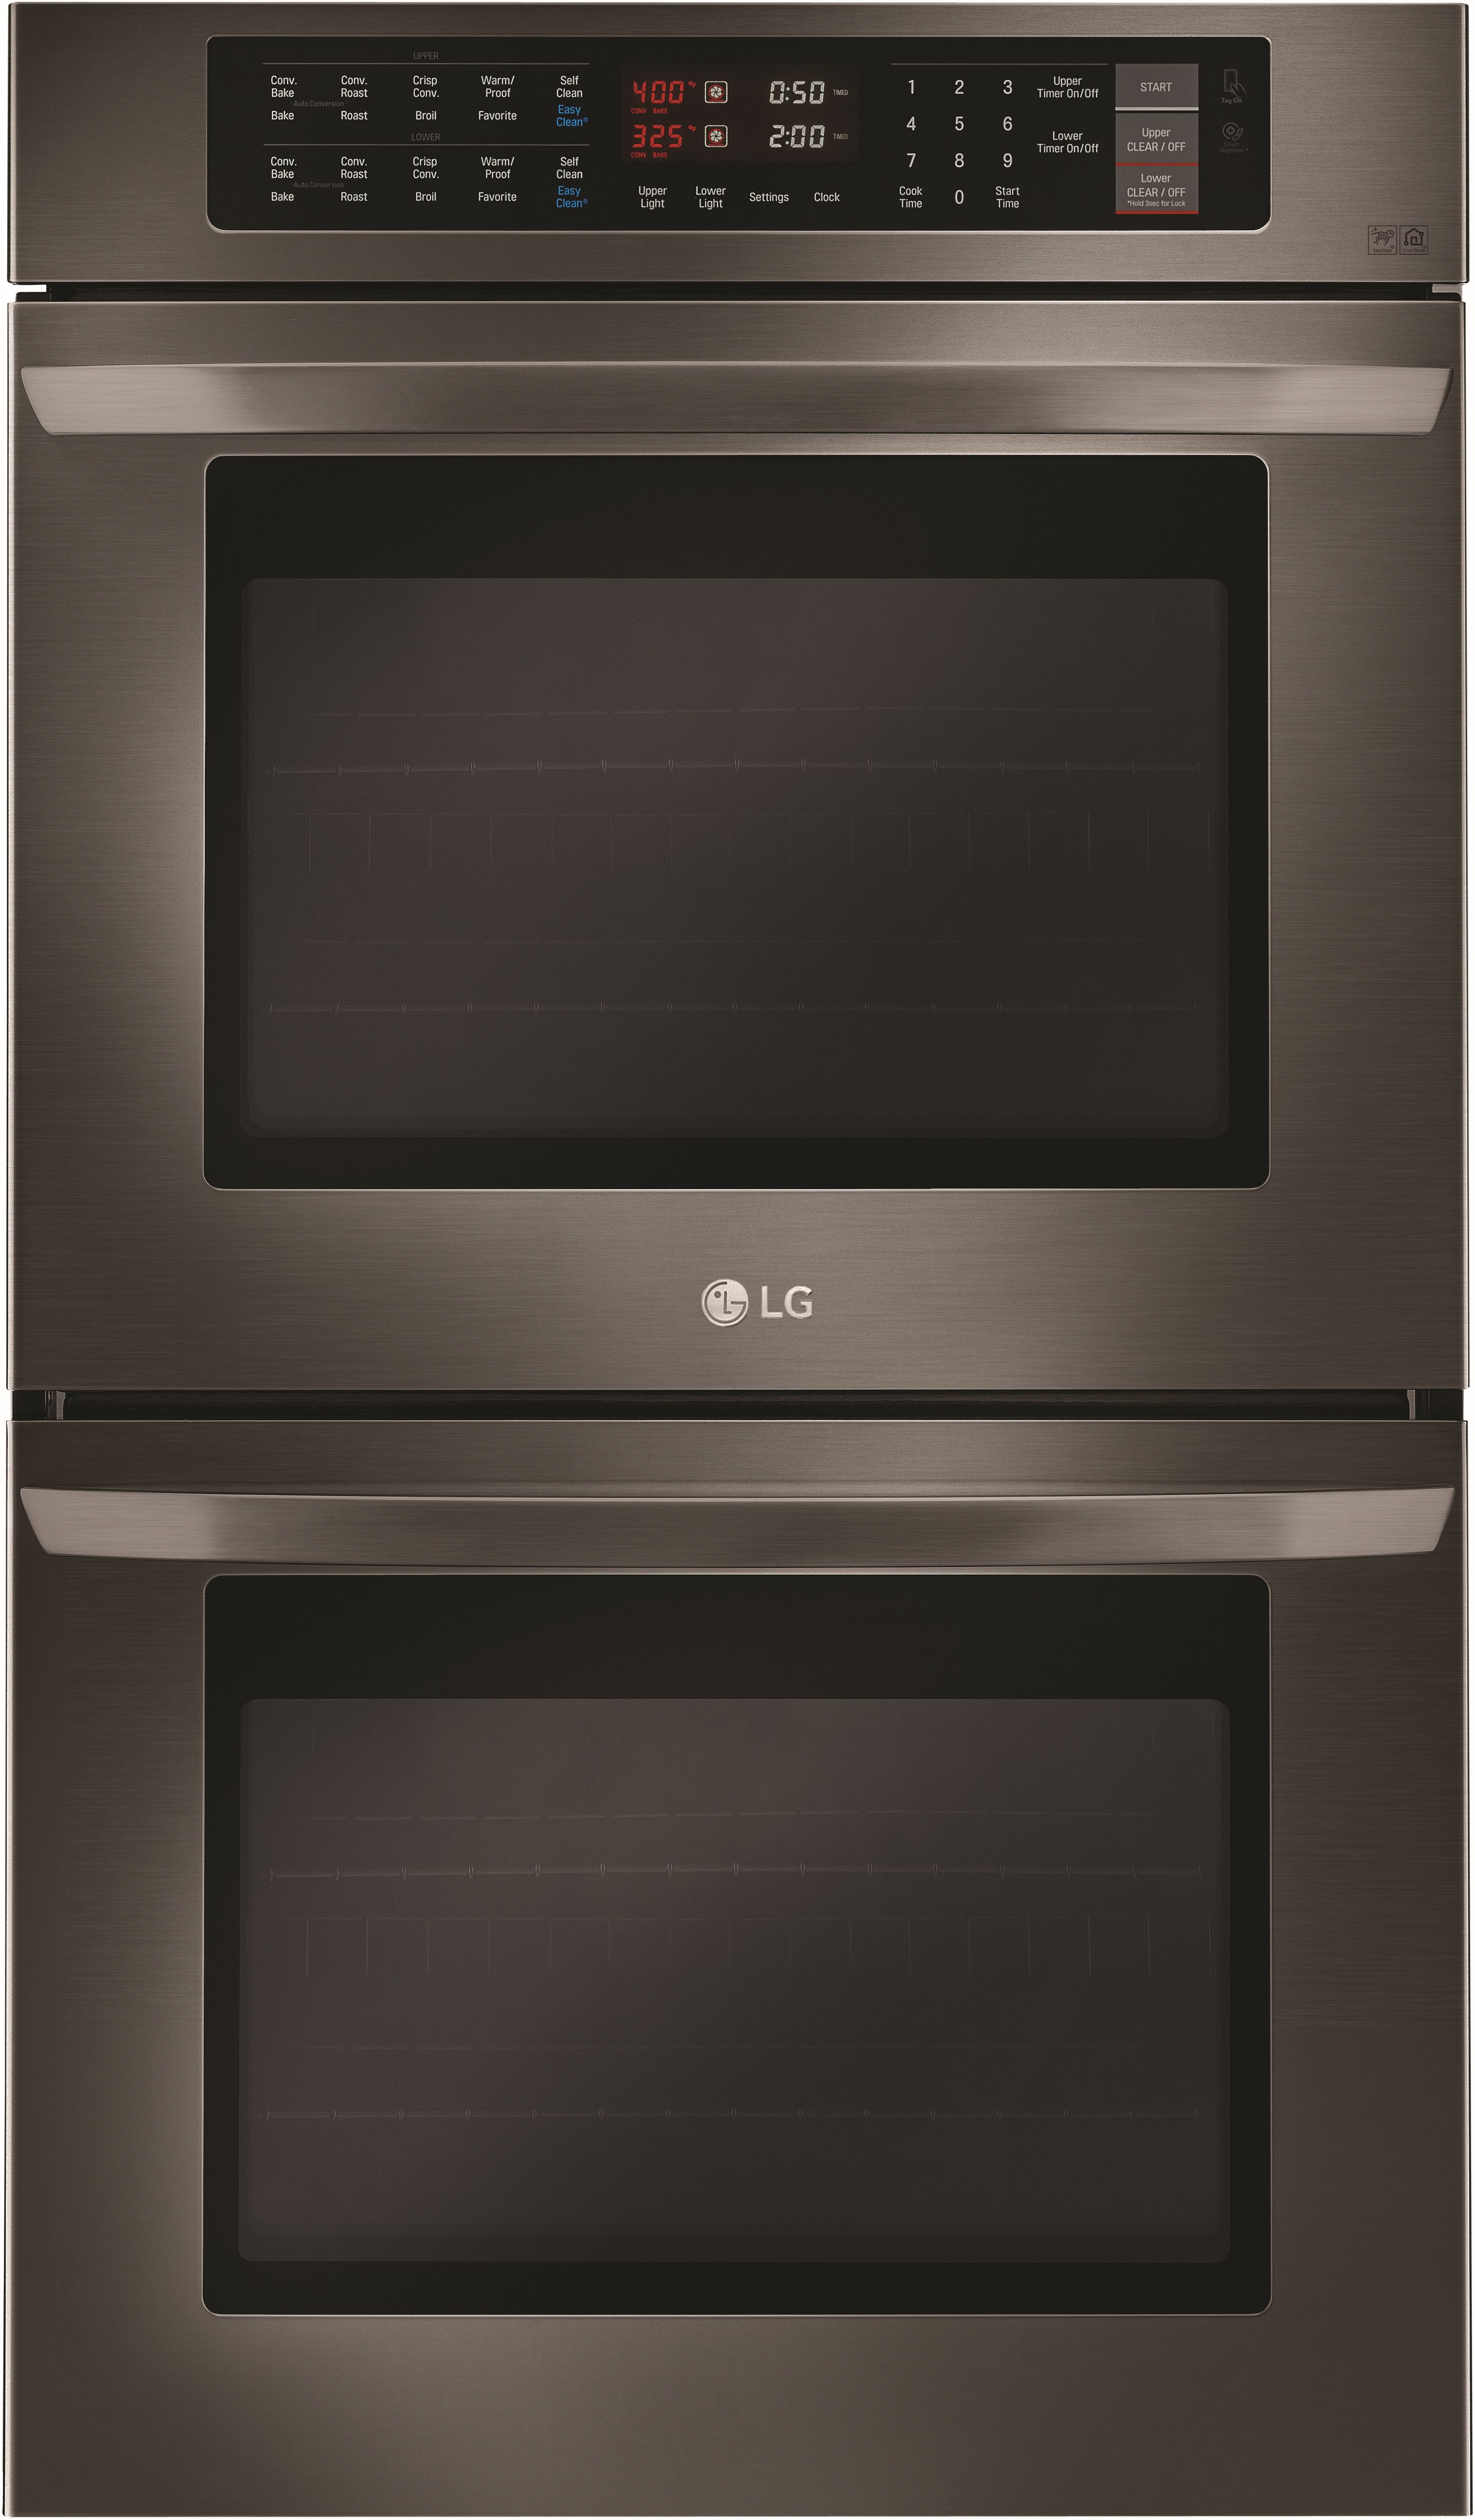 LG 30" Black Stainless Steel Electric Built In Double Oven